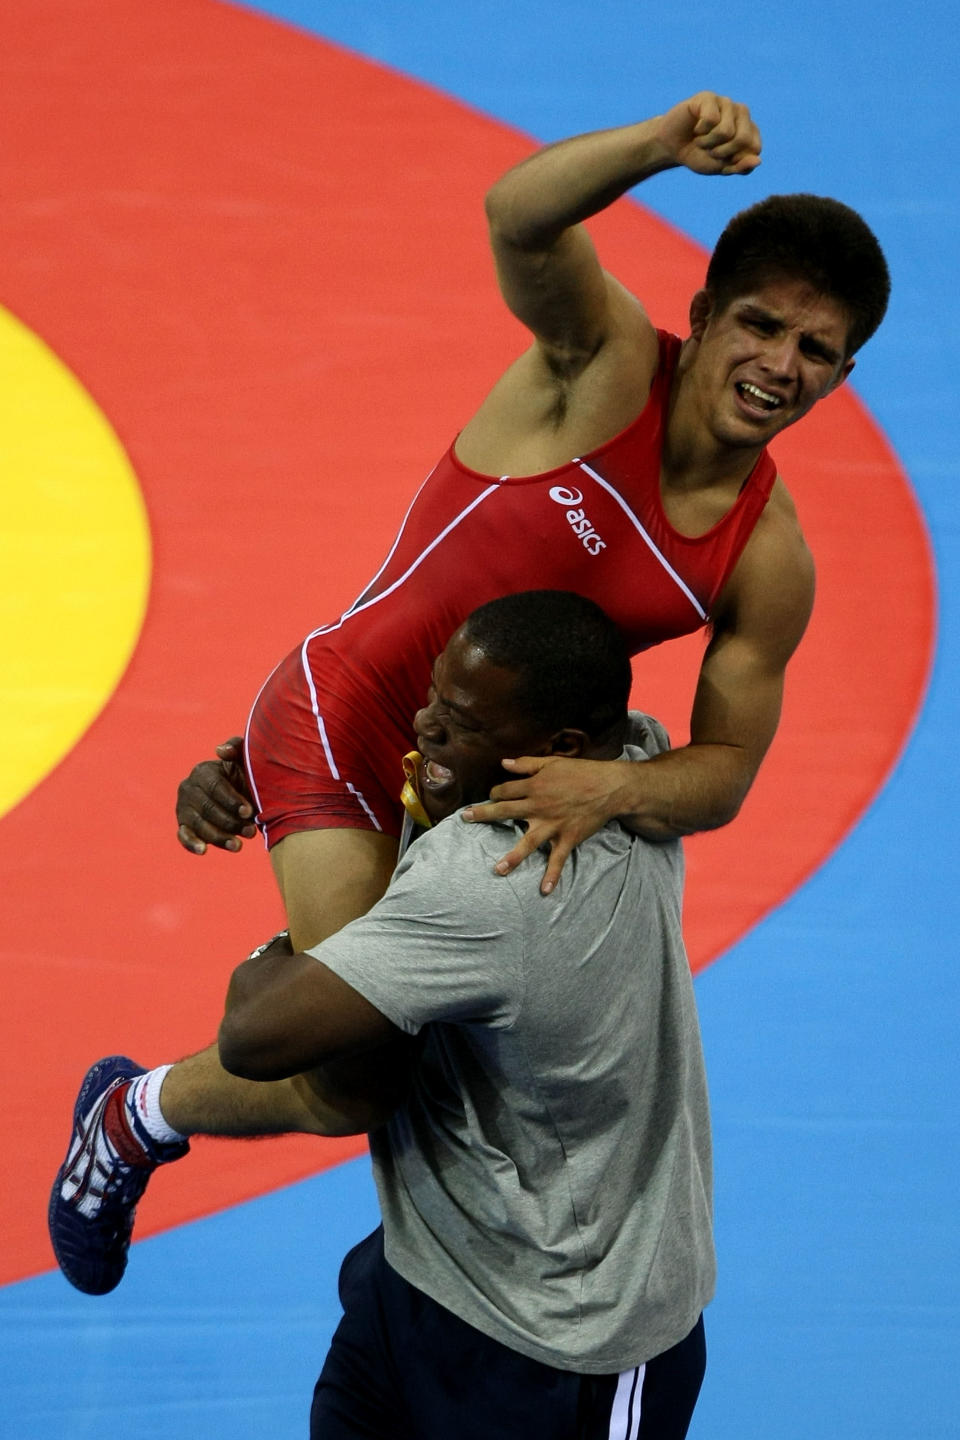 BEIJING - AUGUST 19: Henry Cejudo of the United States celebrates after defeating Shingo Matsumoto of Japan to win the gold medal in the men's 55kg freestyle wrestling event at the China Agriculture University Gymnasium on Day 11 of the Beijing 2008 Olympic Games on August 19, 2008 in Beijing, China. (Photo by Jed Jacobsohn/Getty Images)